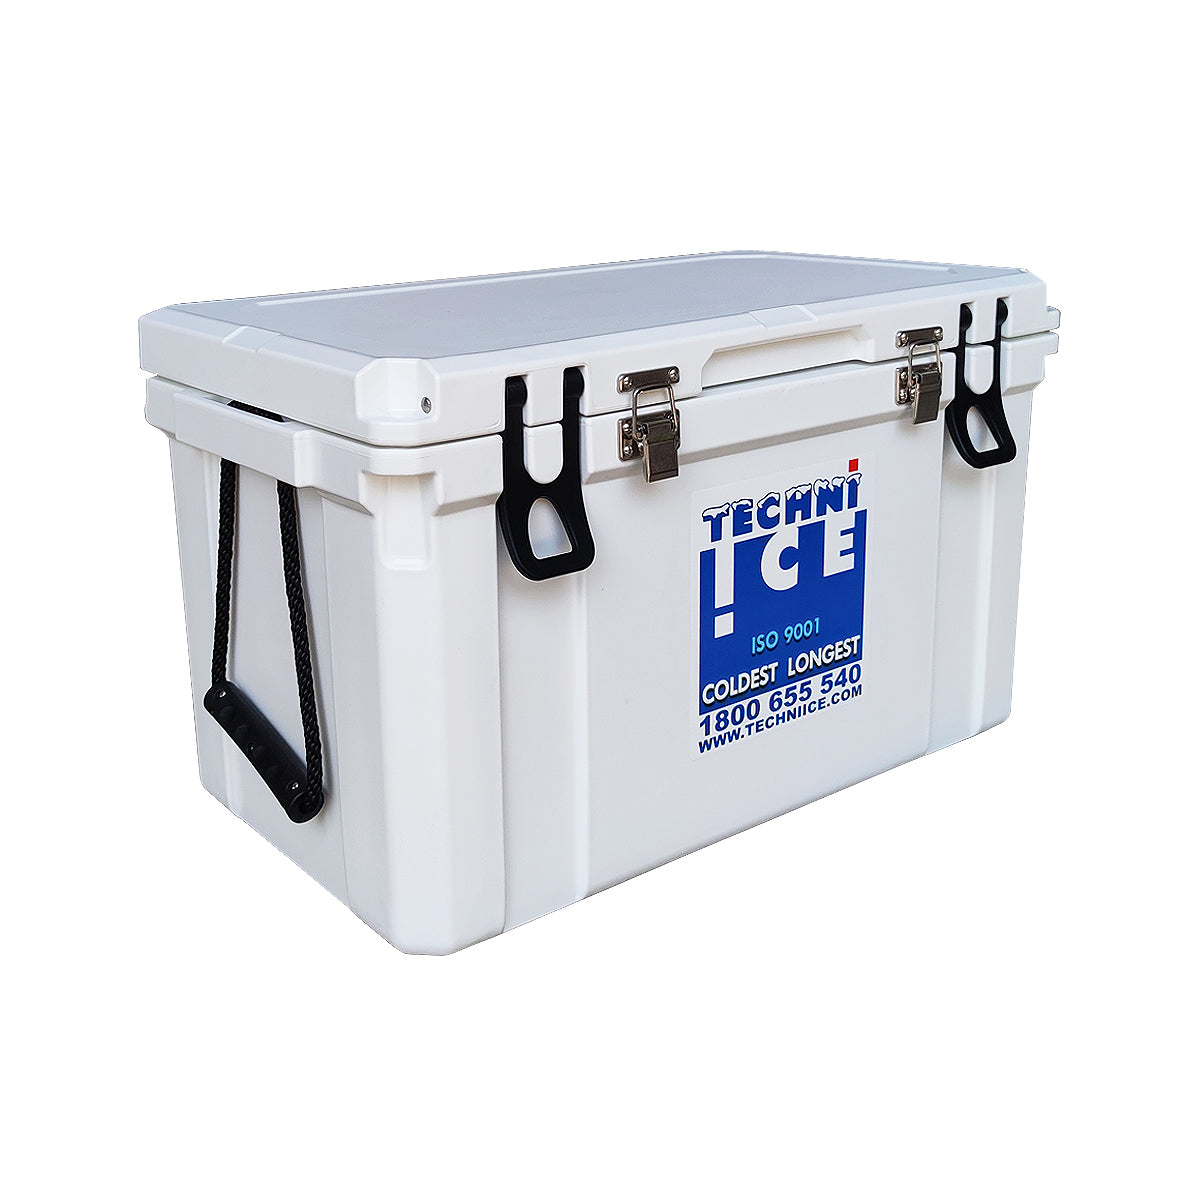 45L Classic Hardcore *FRESH STOCKS OF MARBLE WHITE JUST ARRIVED *Blue and White PREORDER FOR JULY DISPATCH *FREE 6 REUSABLE DRY ICE PACKS VALUES $32.95